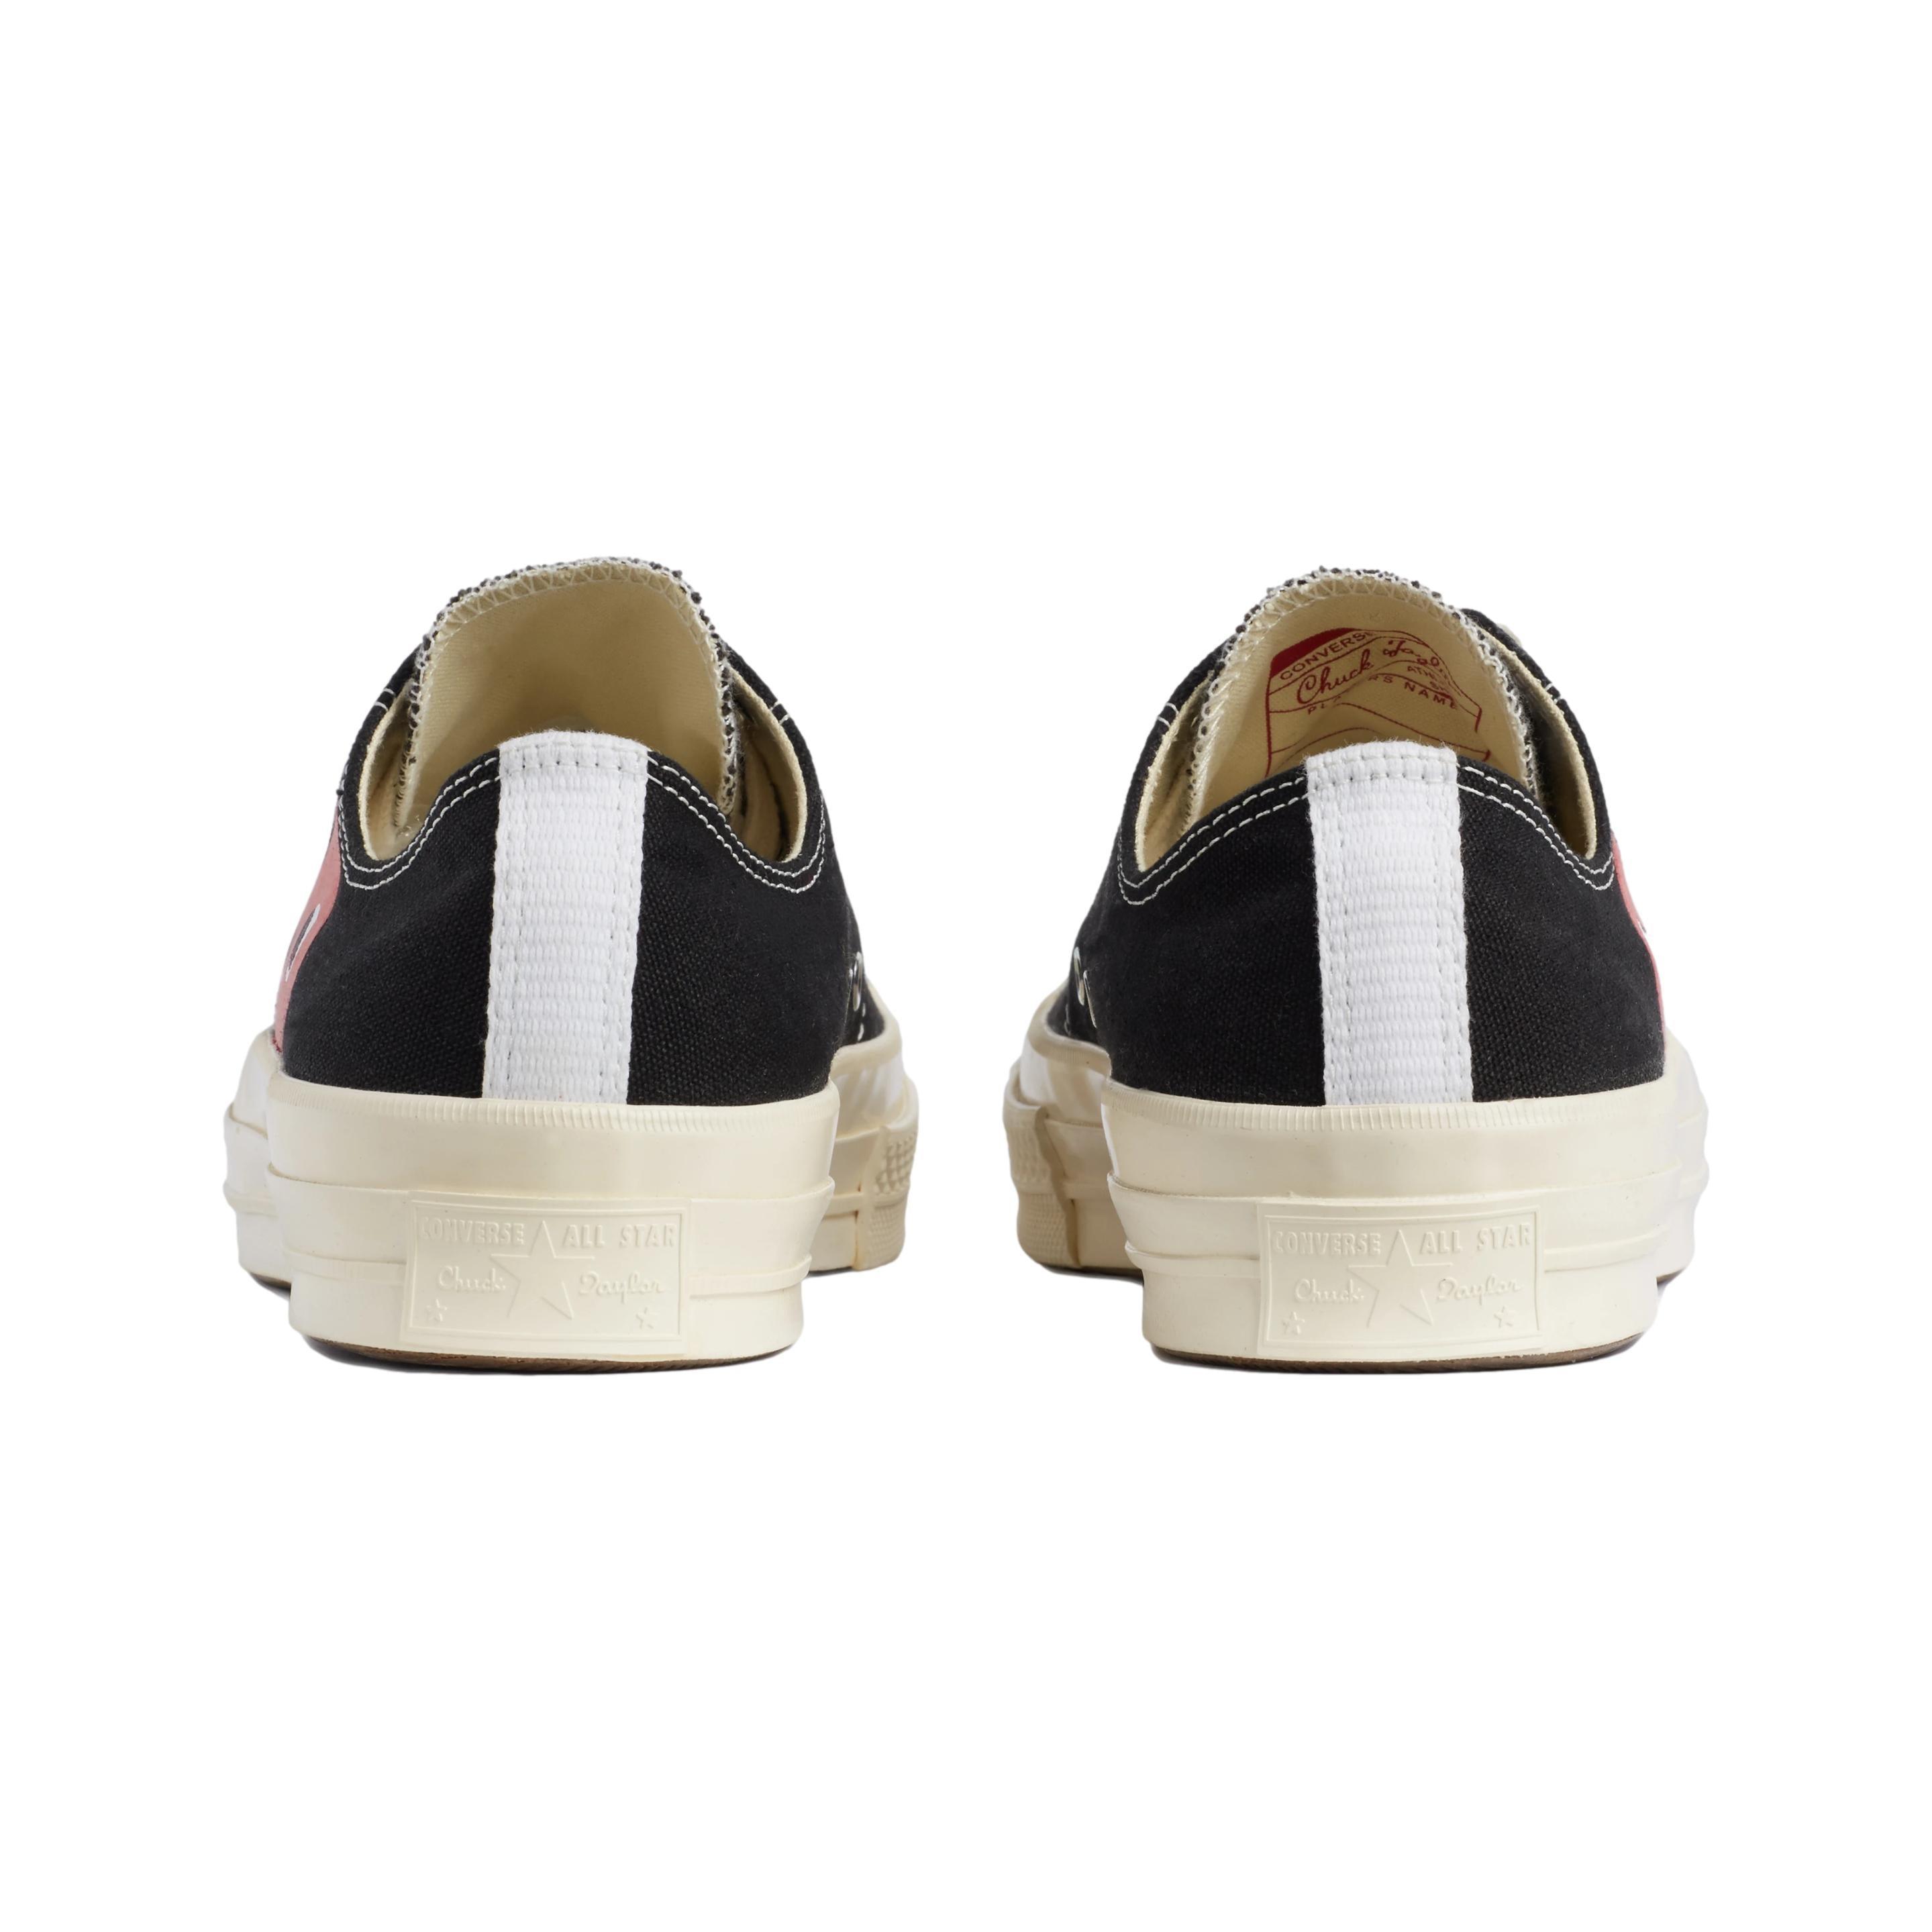 COMME DES GARCONS CONVERSE LOW TOP 1970 OX - Gravity NYC